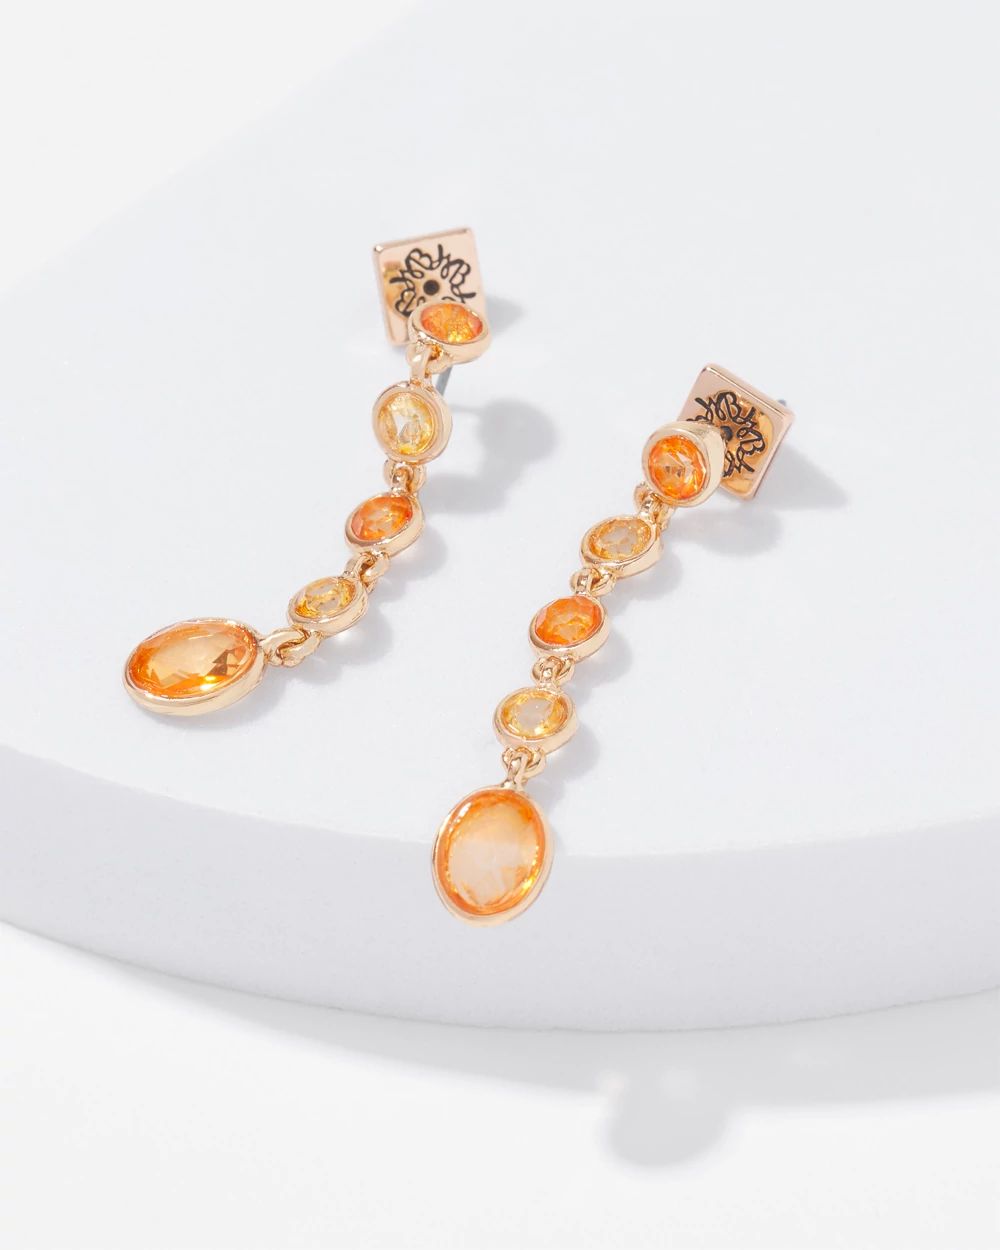 Gold + Peach Crystal Drop Earrings click to view larger image.